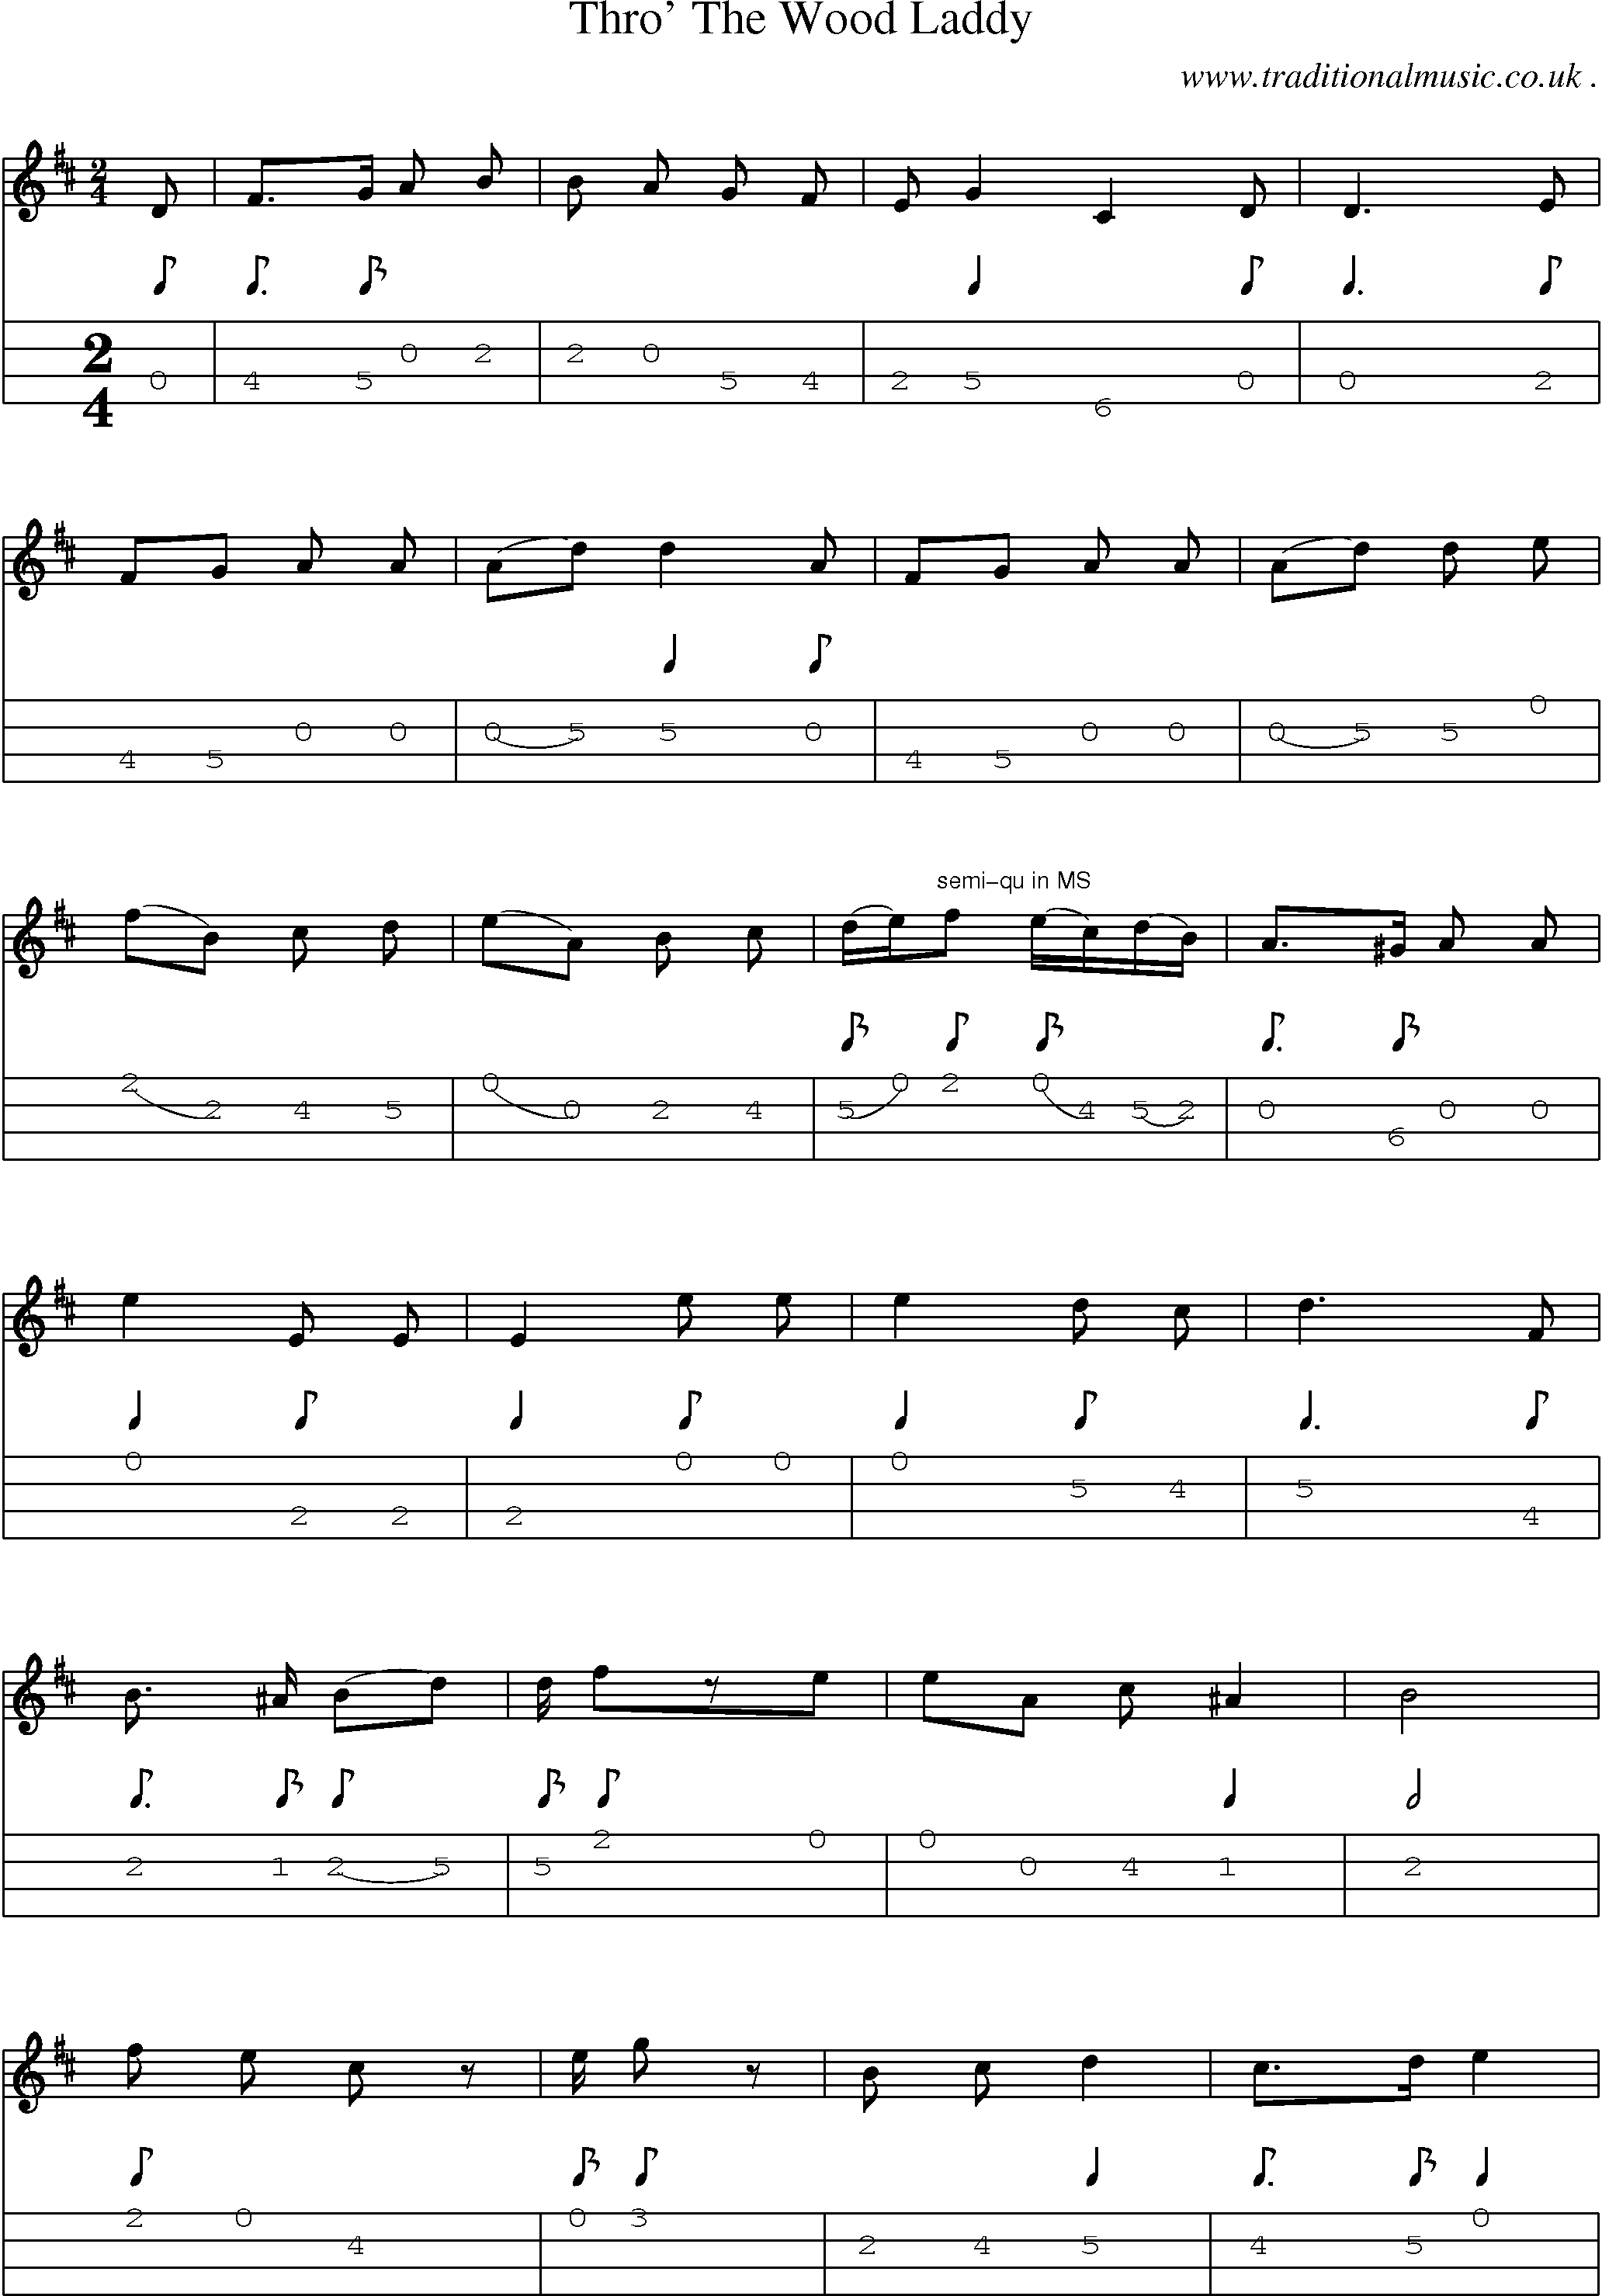 Sheet-Music and Mandolin Tabs for Thro The Wood Laddy